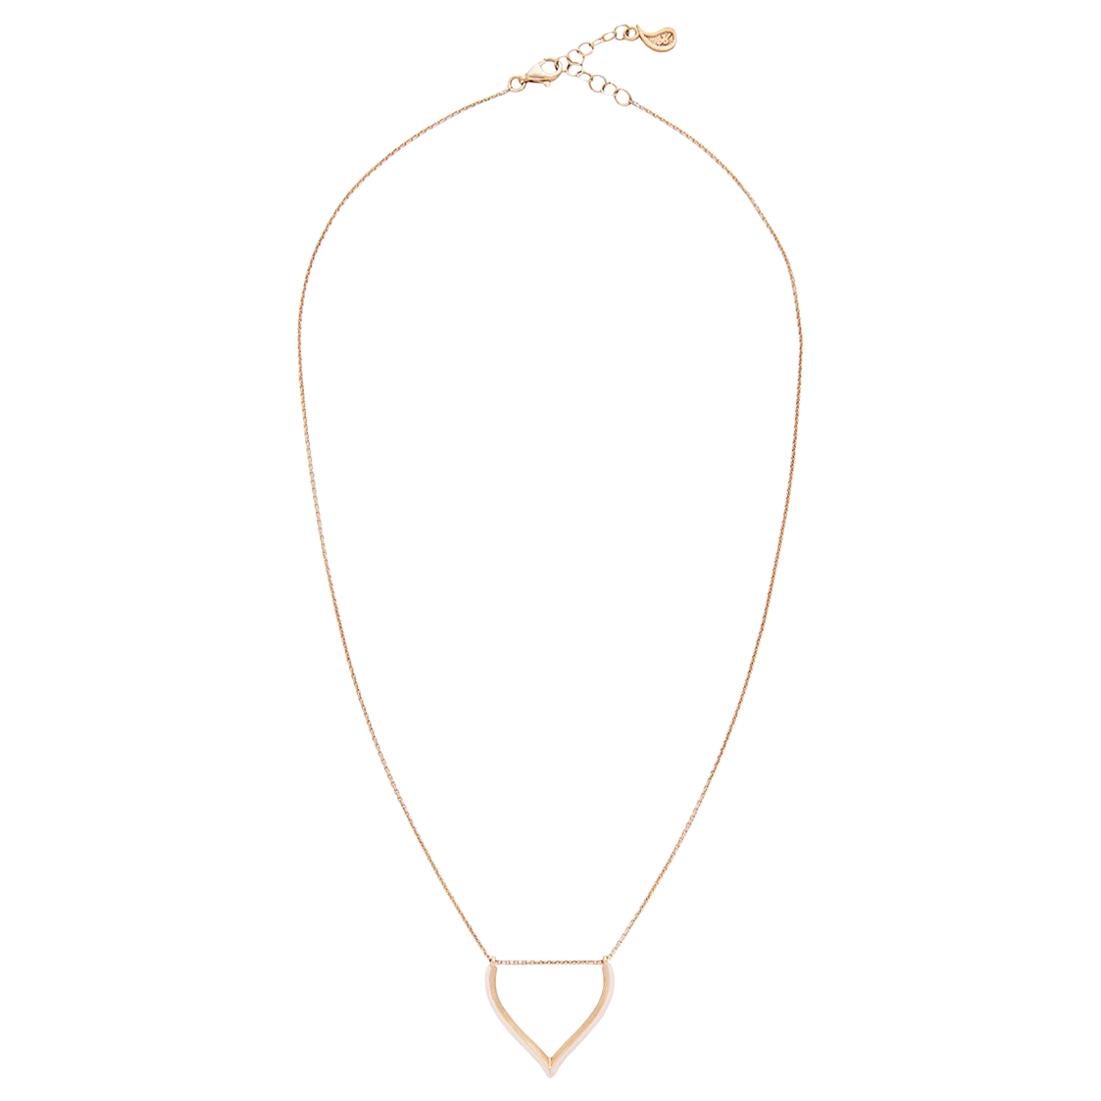 Necklace Chain Classic 18k Gold-Plated Sterling Silver Lotus Shaped Motif Greek